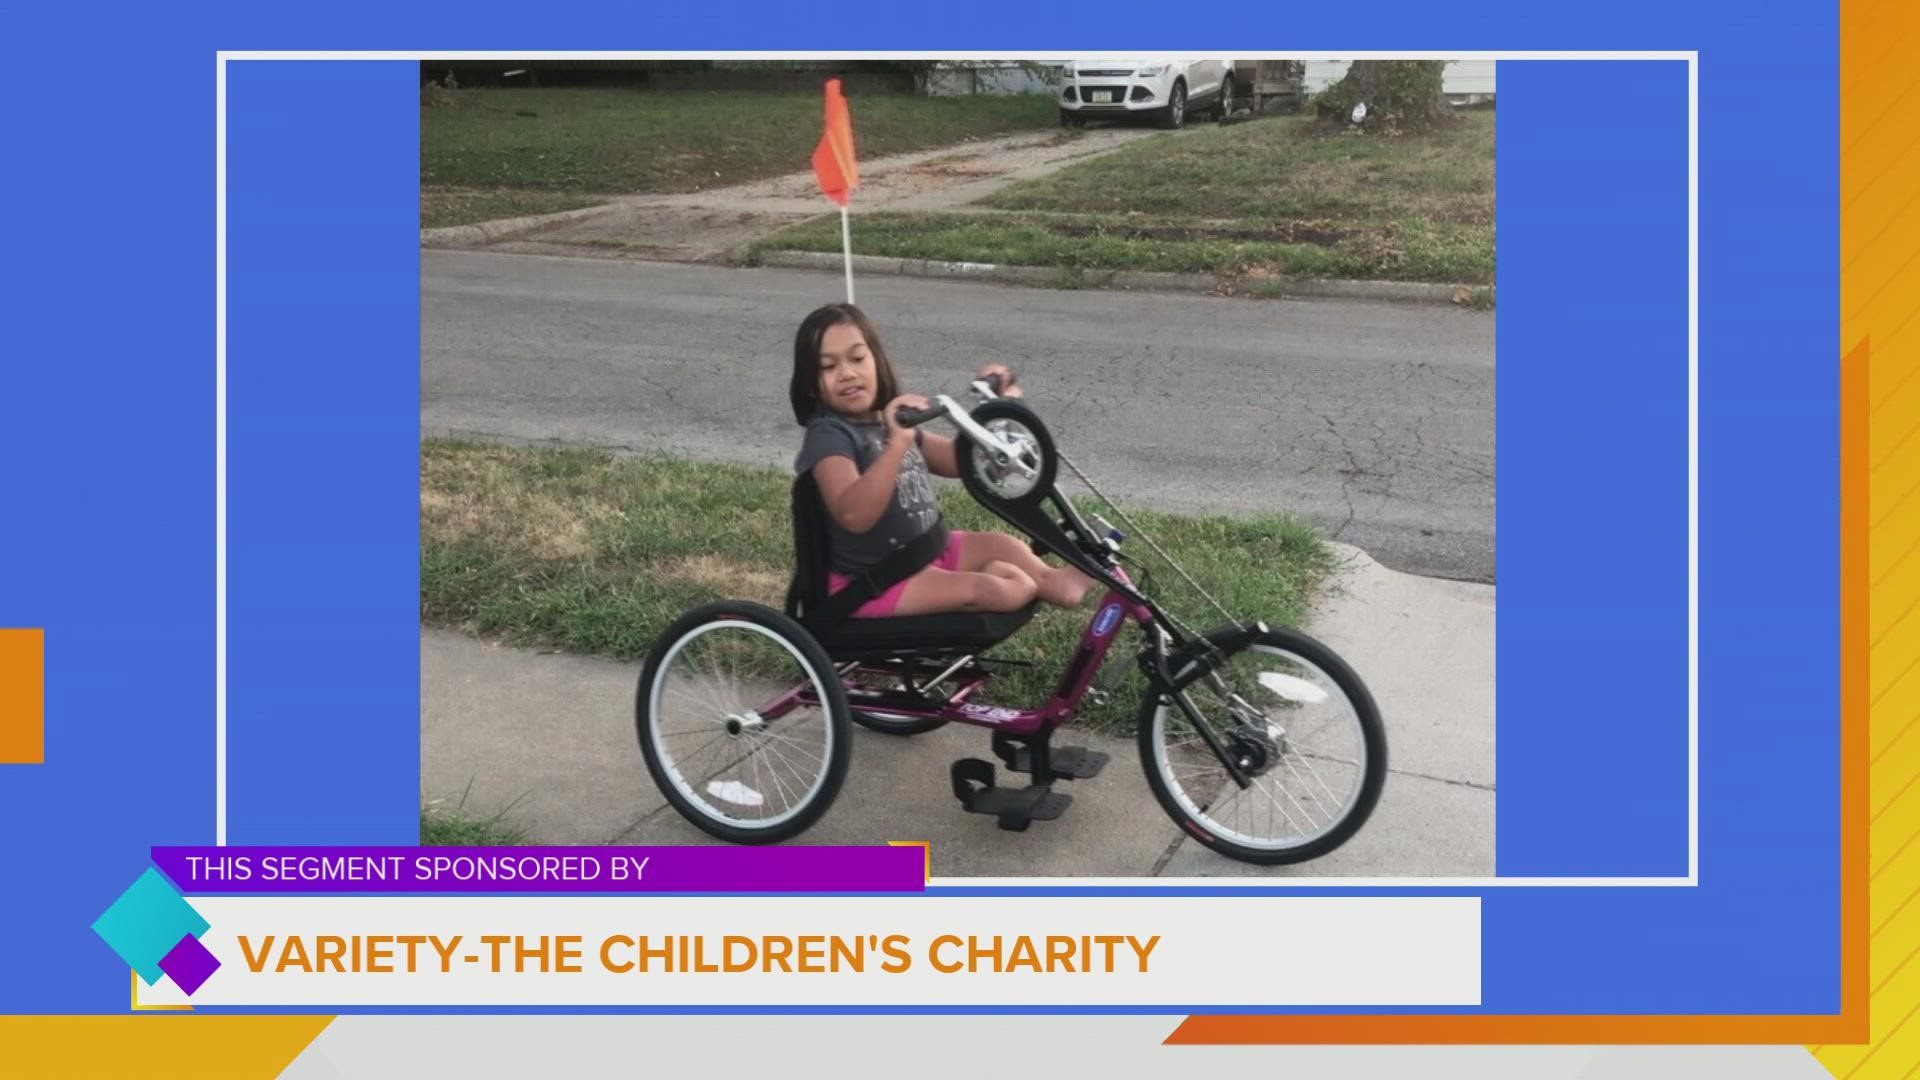 Ann Nyberg joins us to talk about the "Handcycle" that Variety the Children's Charity provided to her daughter, Isabella, that gave her the ability to ride a bike!